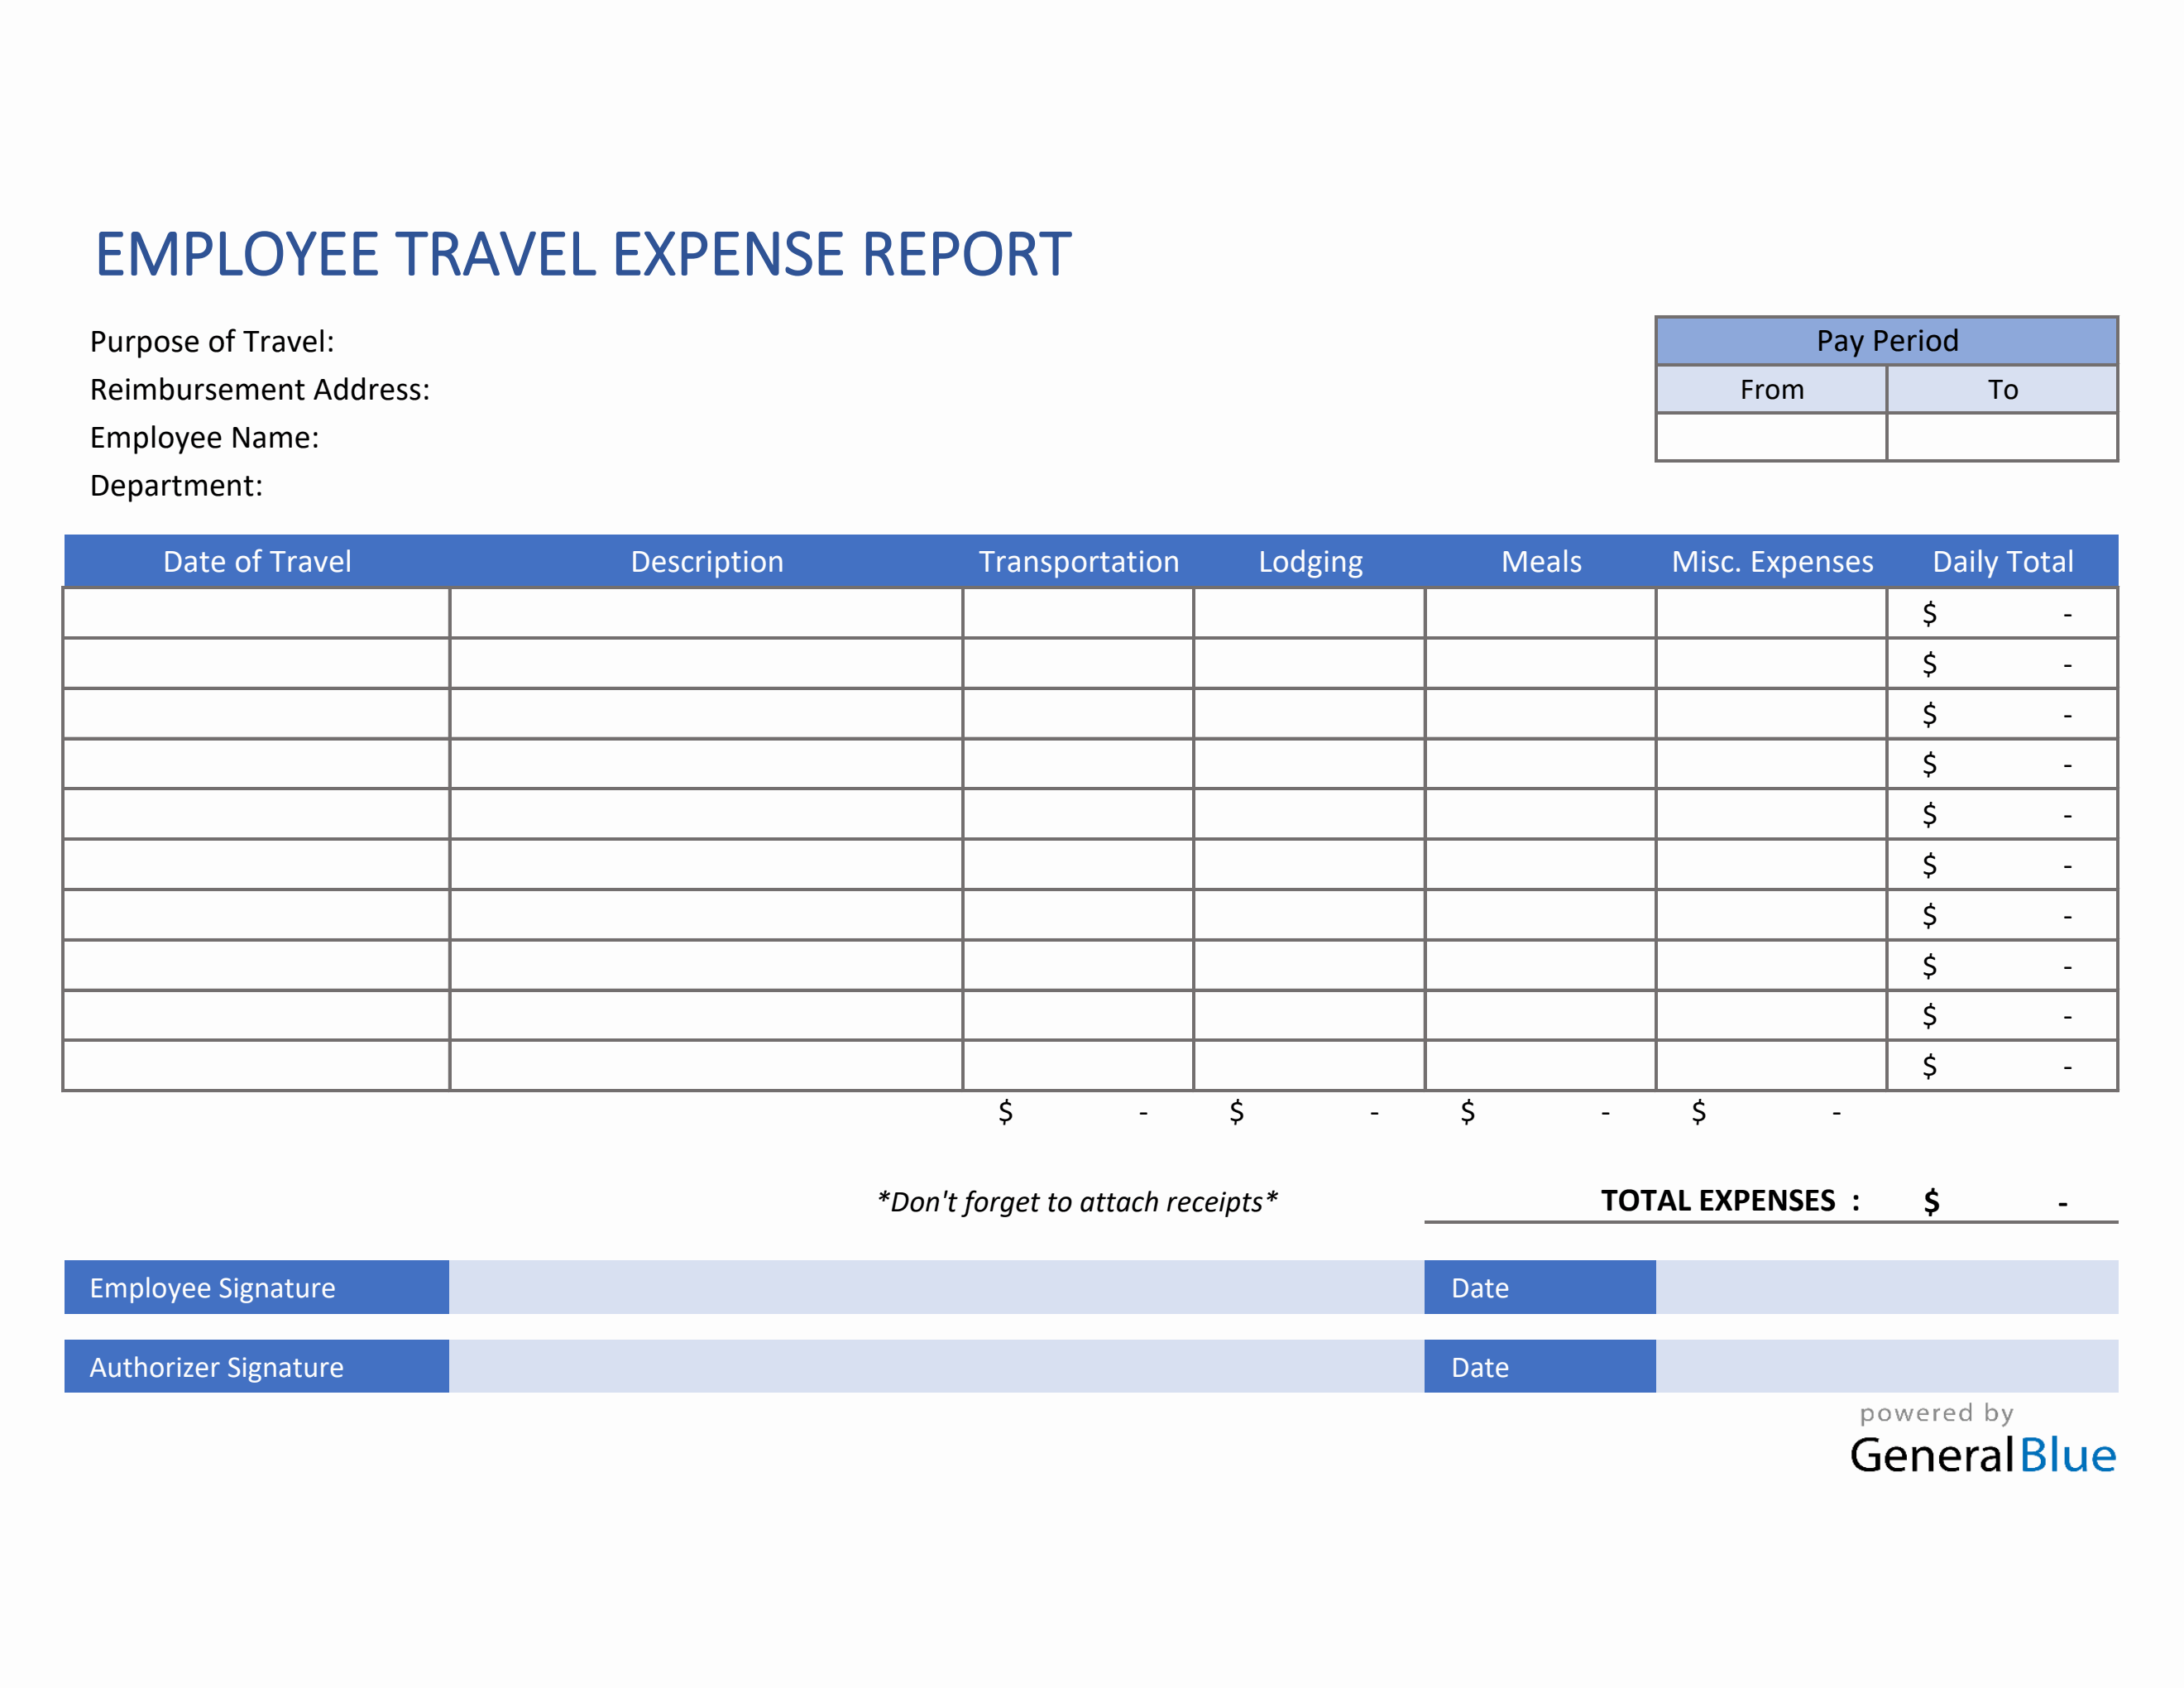 employee-travel-expense-report-template-in-excel